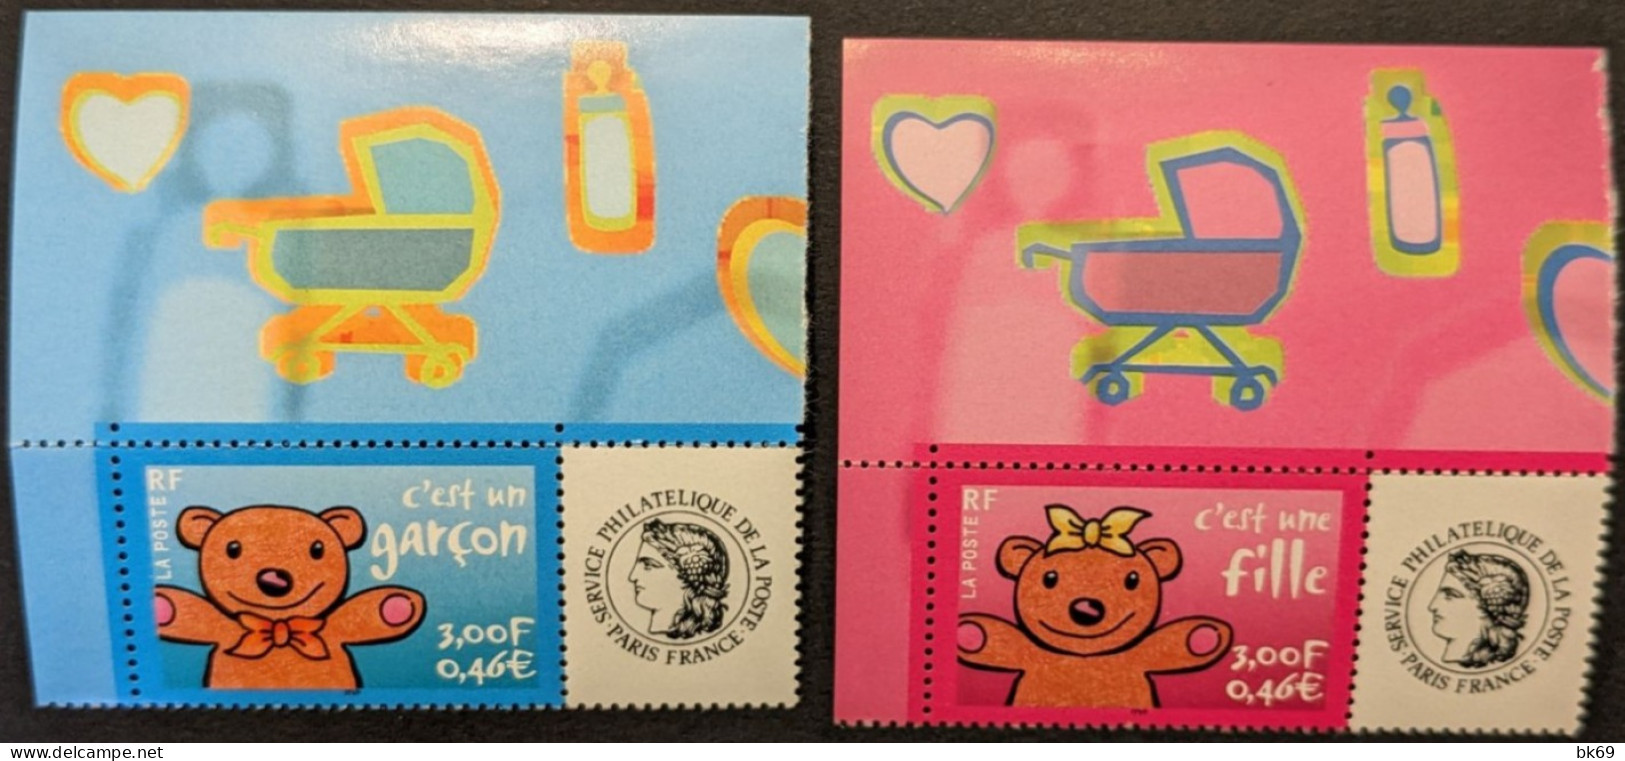 3431A & 3432A - Unused Stamps